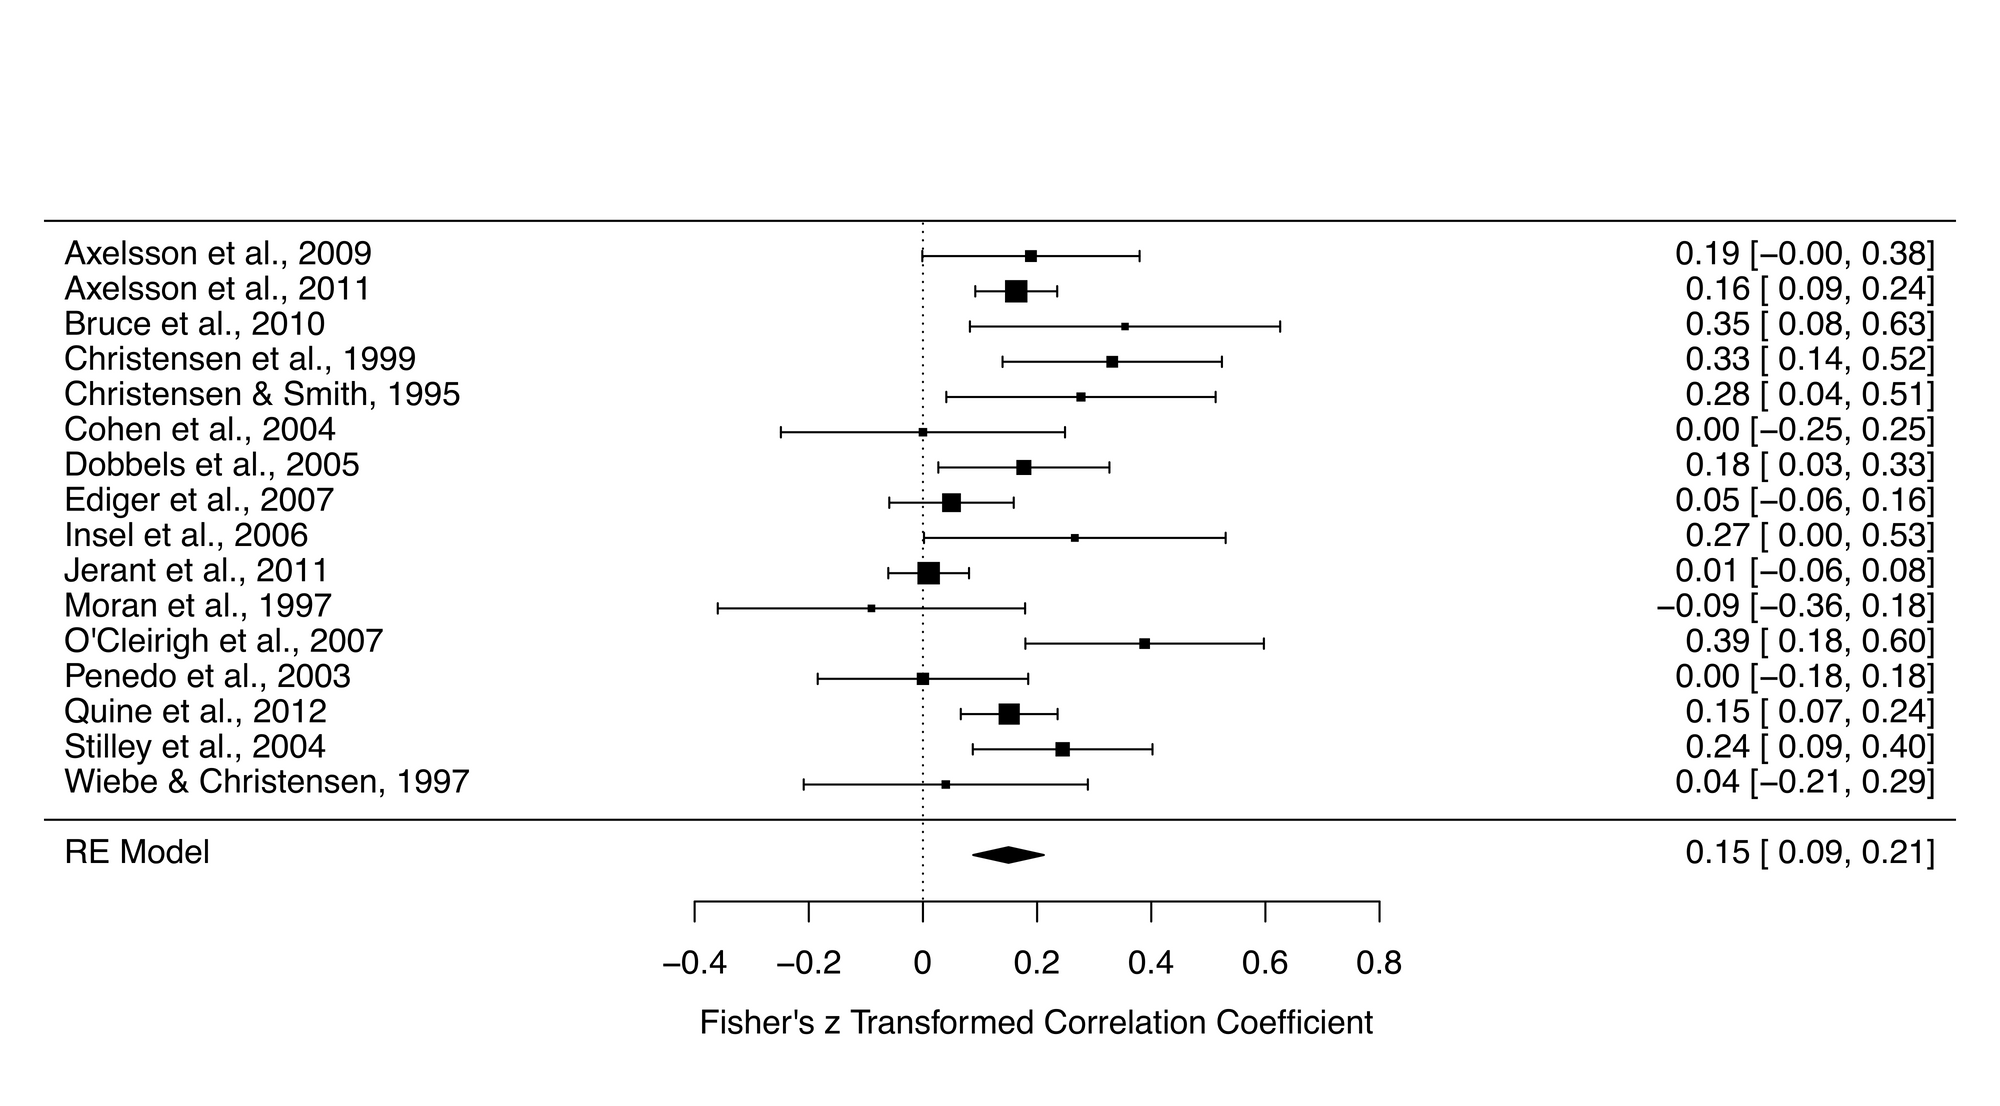 Oh my GOSH: Calculating all possible meta-analysis study combinations